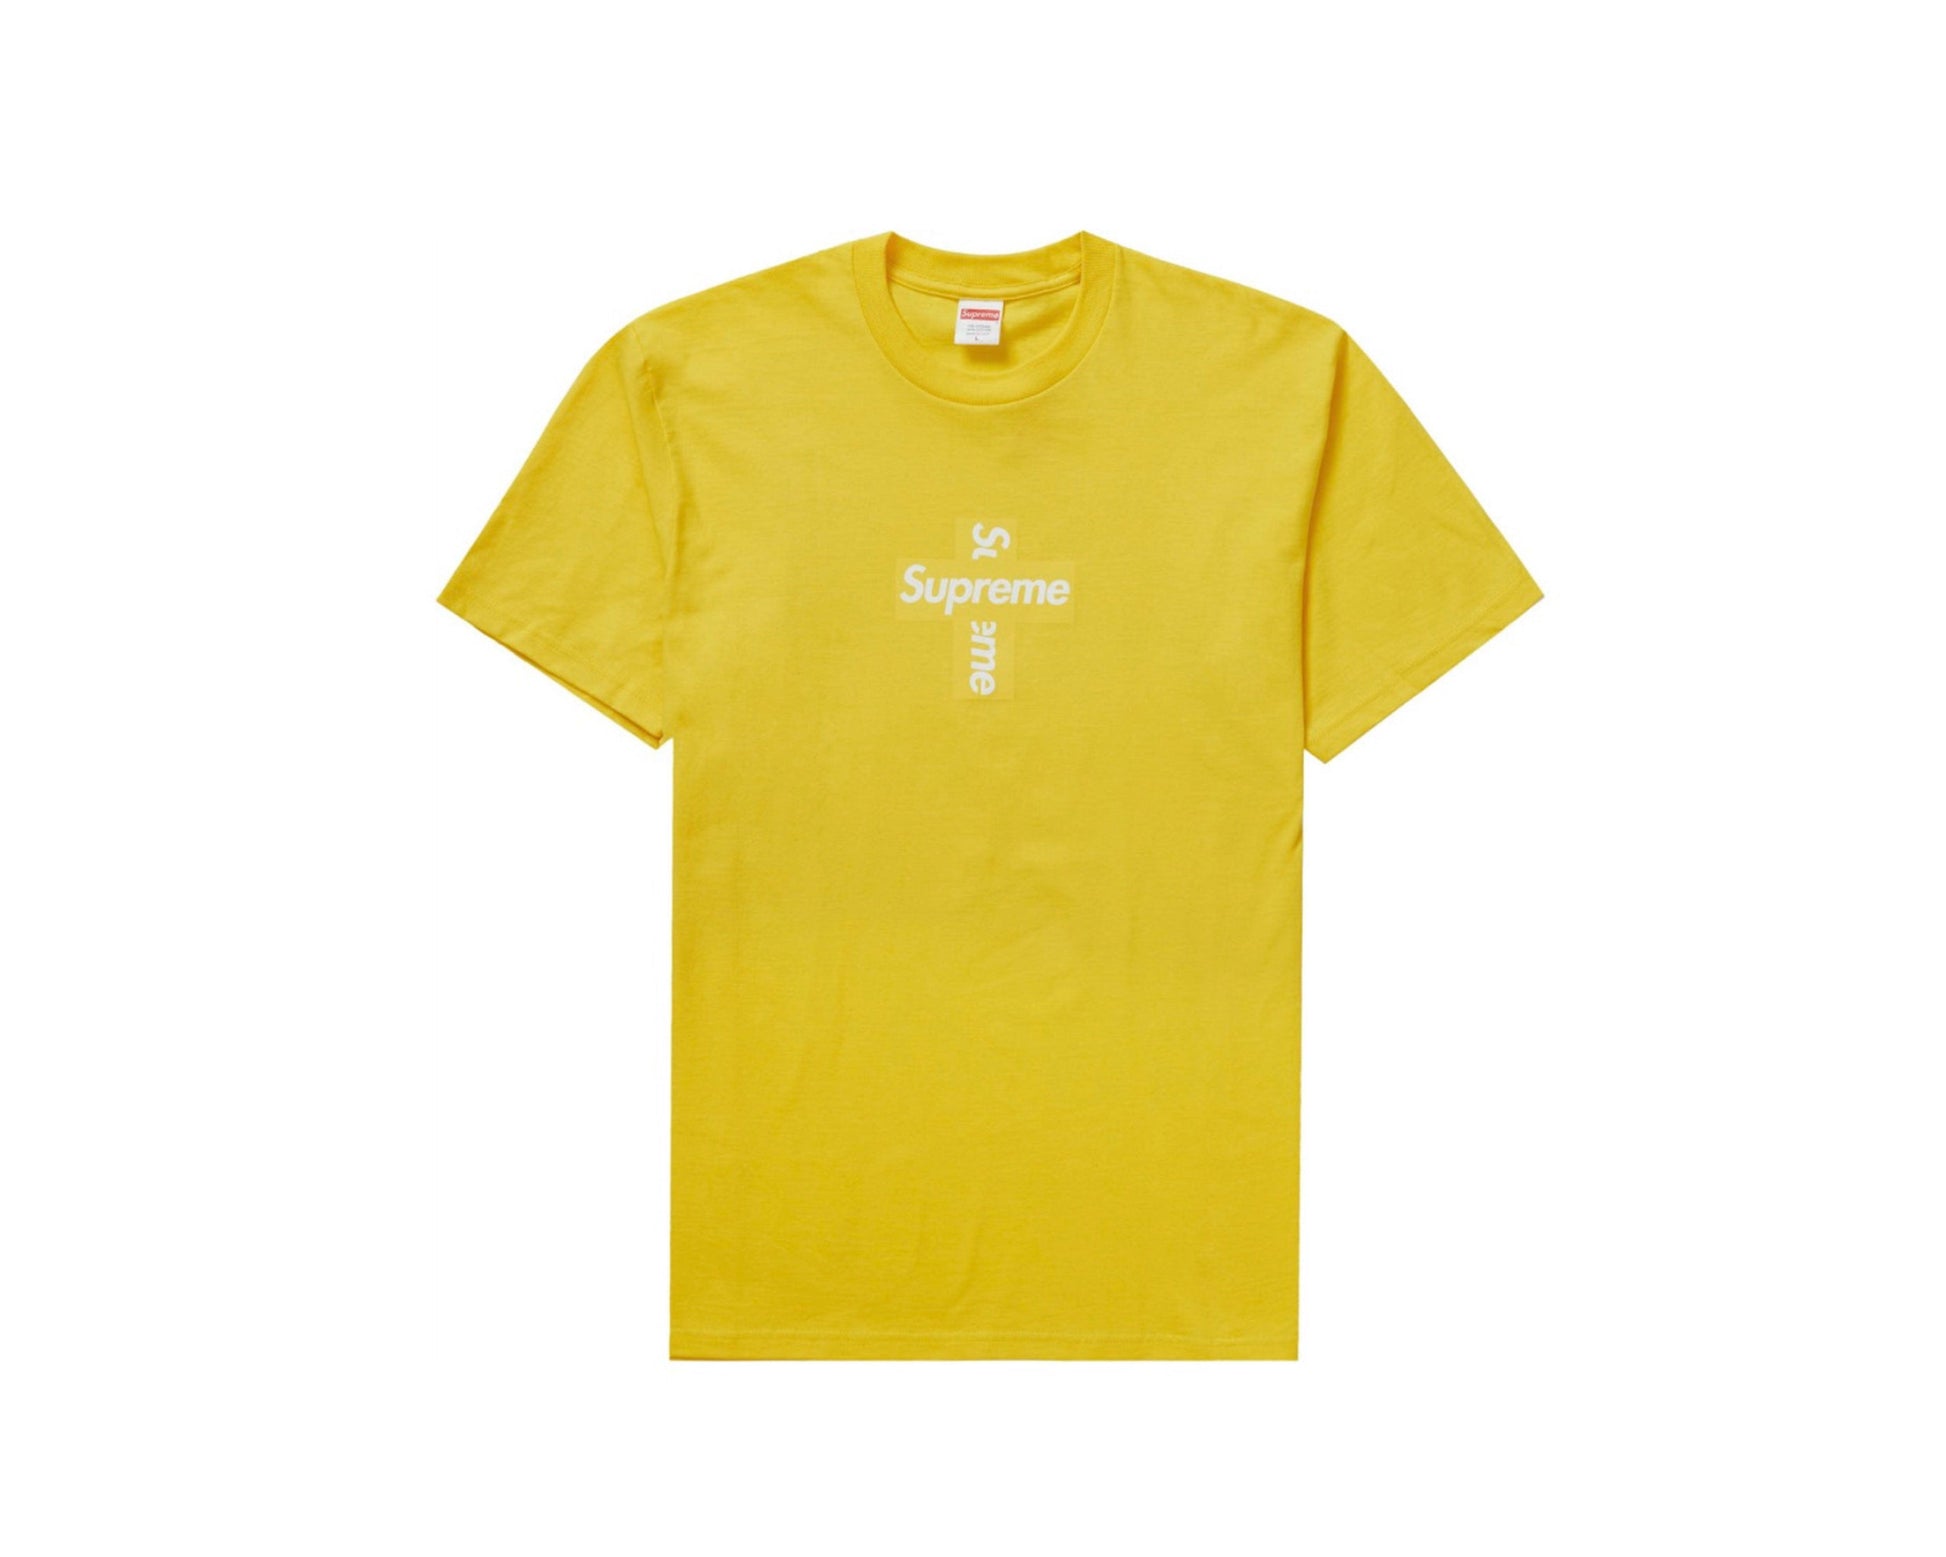 Supreme Cross Box Logo Tee Yellow - Only at www.BallersClubKickz.com - The Yellow version of Supreme Cross Box Logo Tee features two yellow colored box logo on a yellow shirt. These Supreme Cross Box Logo Tees were available in December of 2020.